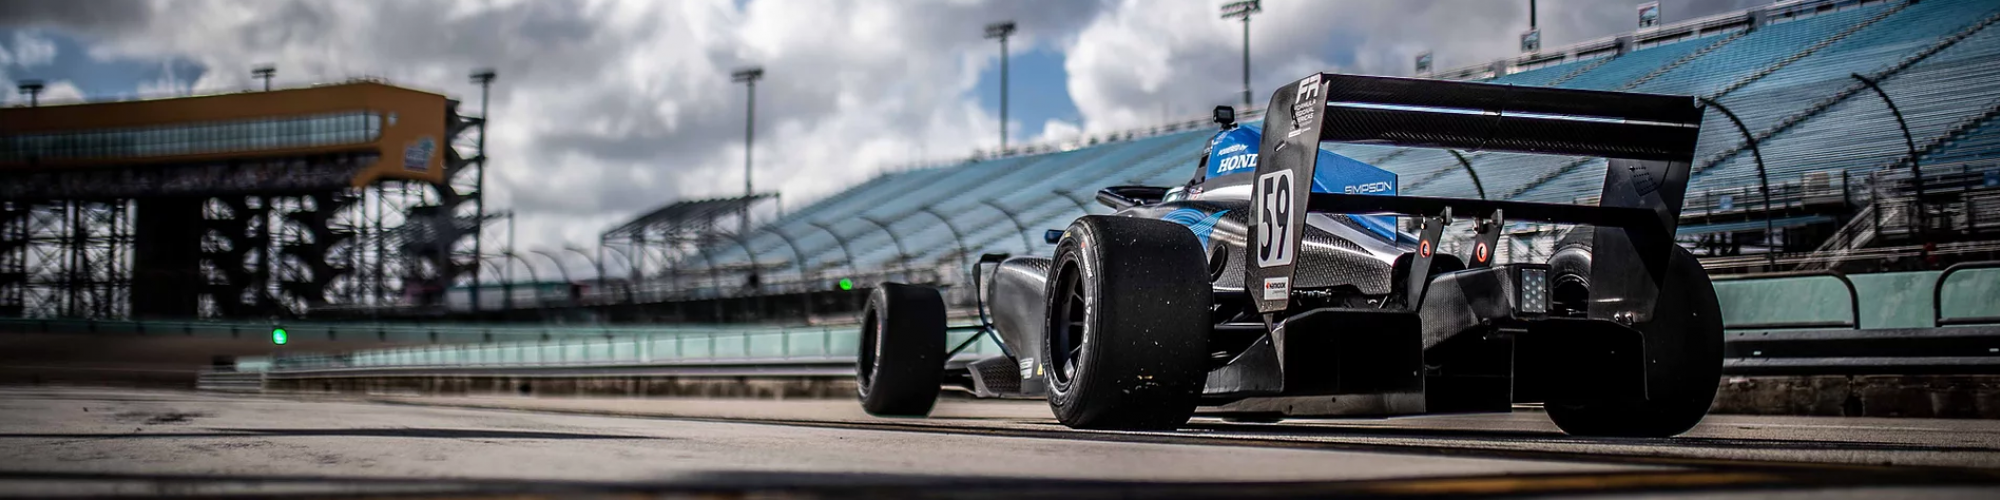 HMD MOTORSPORTS CLAIMS FIRST CAREER INDY LIGHTS TITLE AT THE HANDS